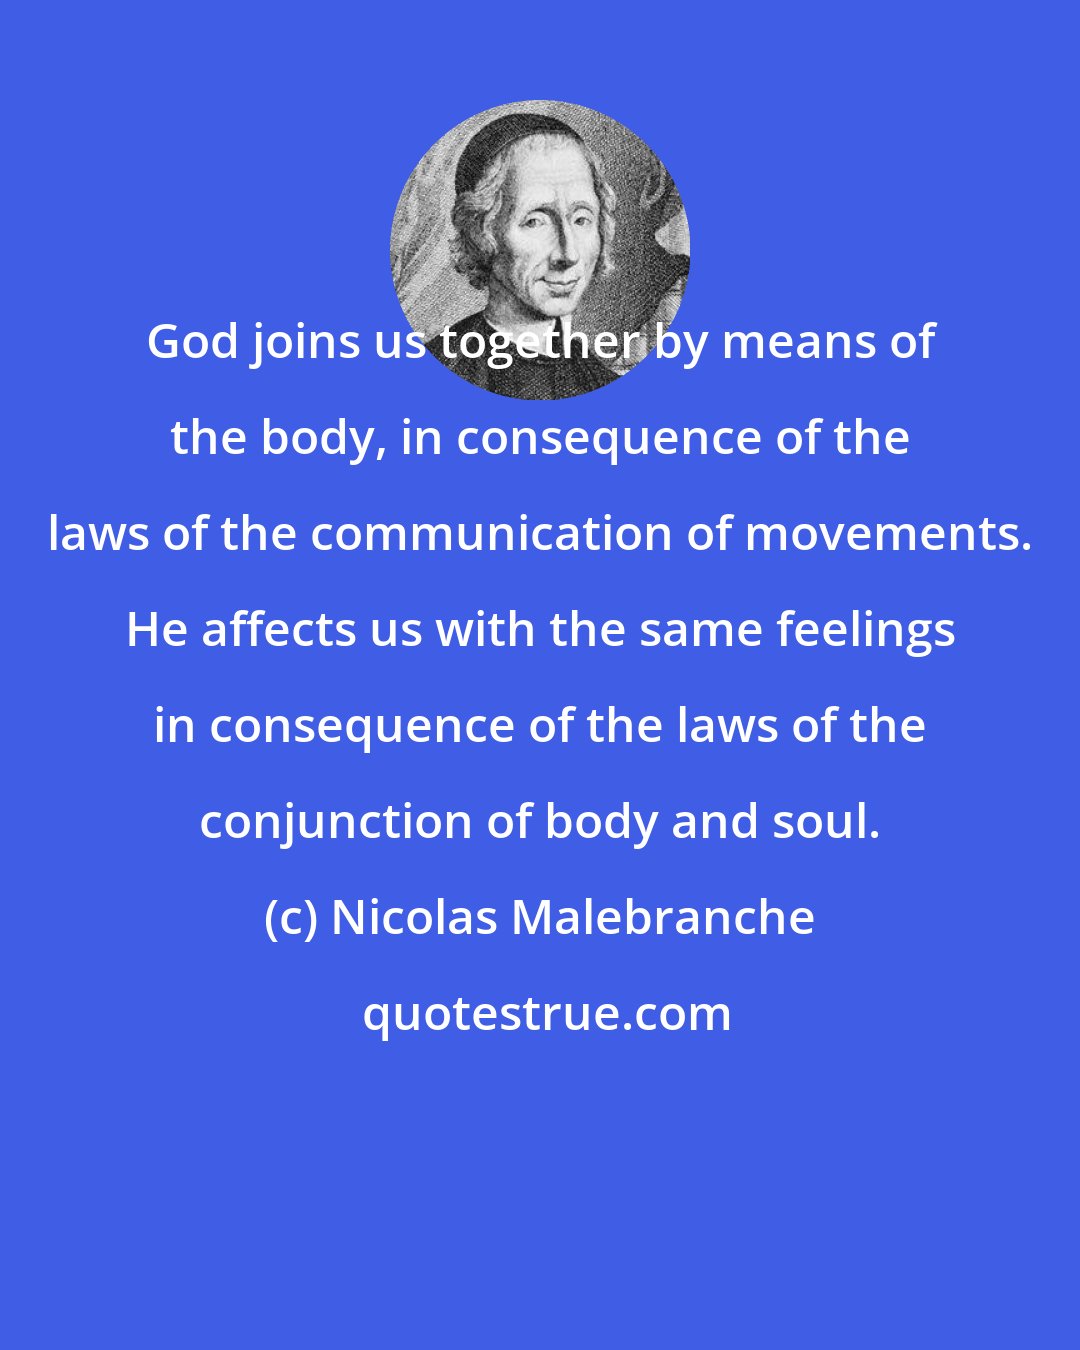 Nicolas Malebranche: God joins us together by means of the body, in consequence of the laws of the communication of movements. He affects us with the same feelings in consequence of the laws of the conjunction of body and soul.